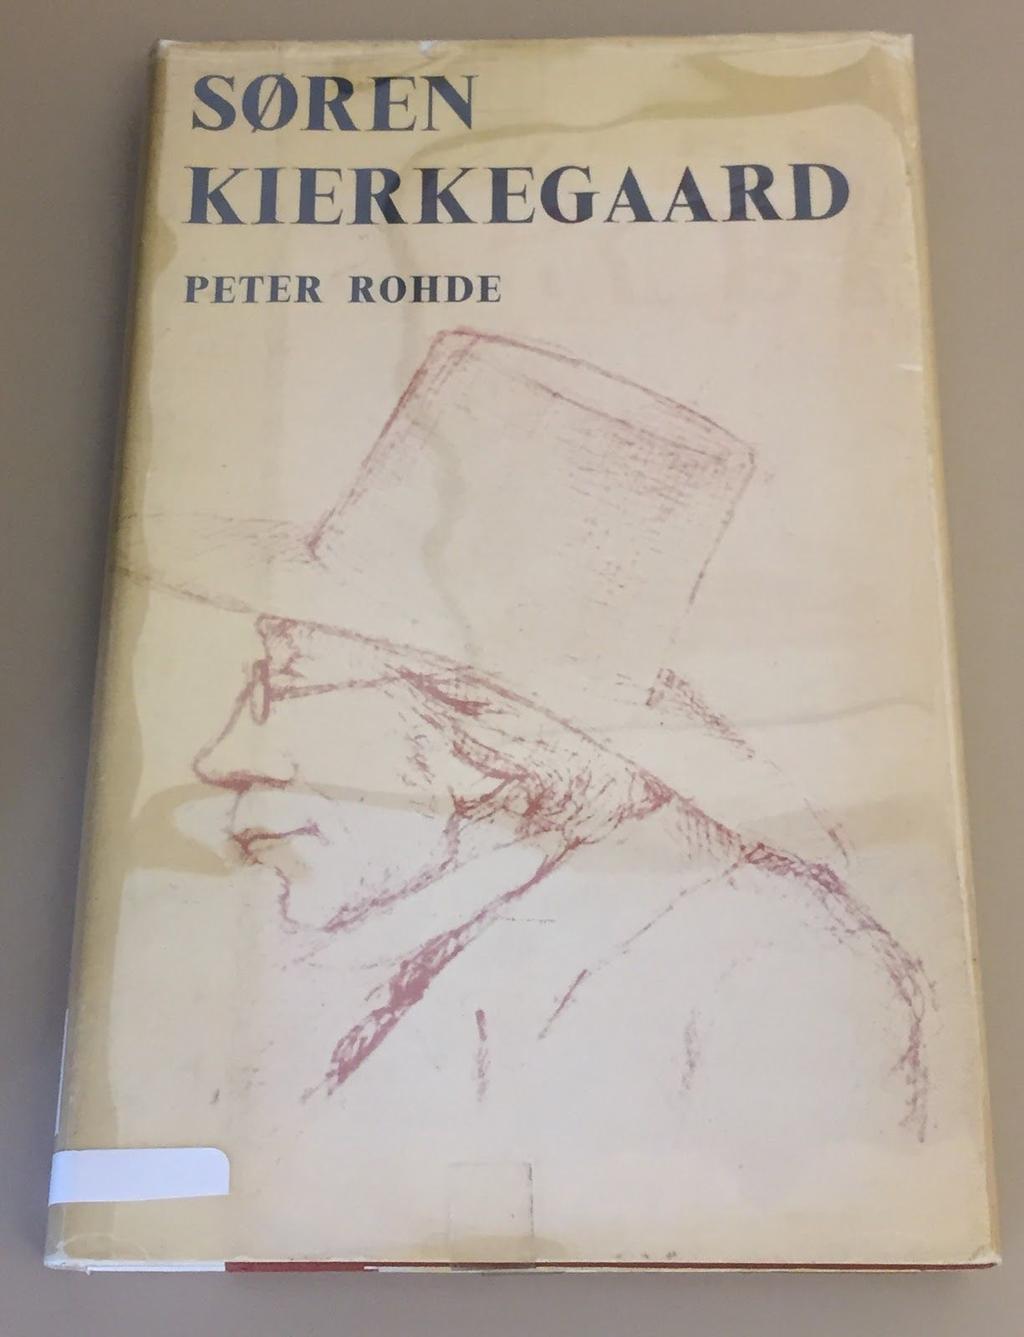 The book replaces the inaccessible Kierkegaard of philosophical legend with an ironic, witty, shrewdly observant writer, writing for the amusement of writing, and not for the grimmer satisfactions of